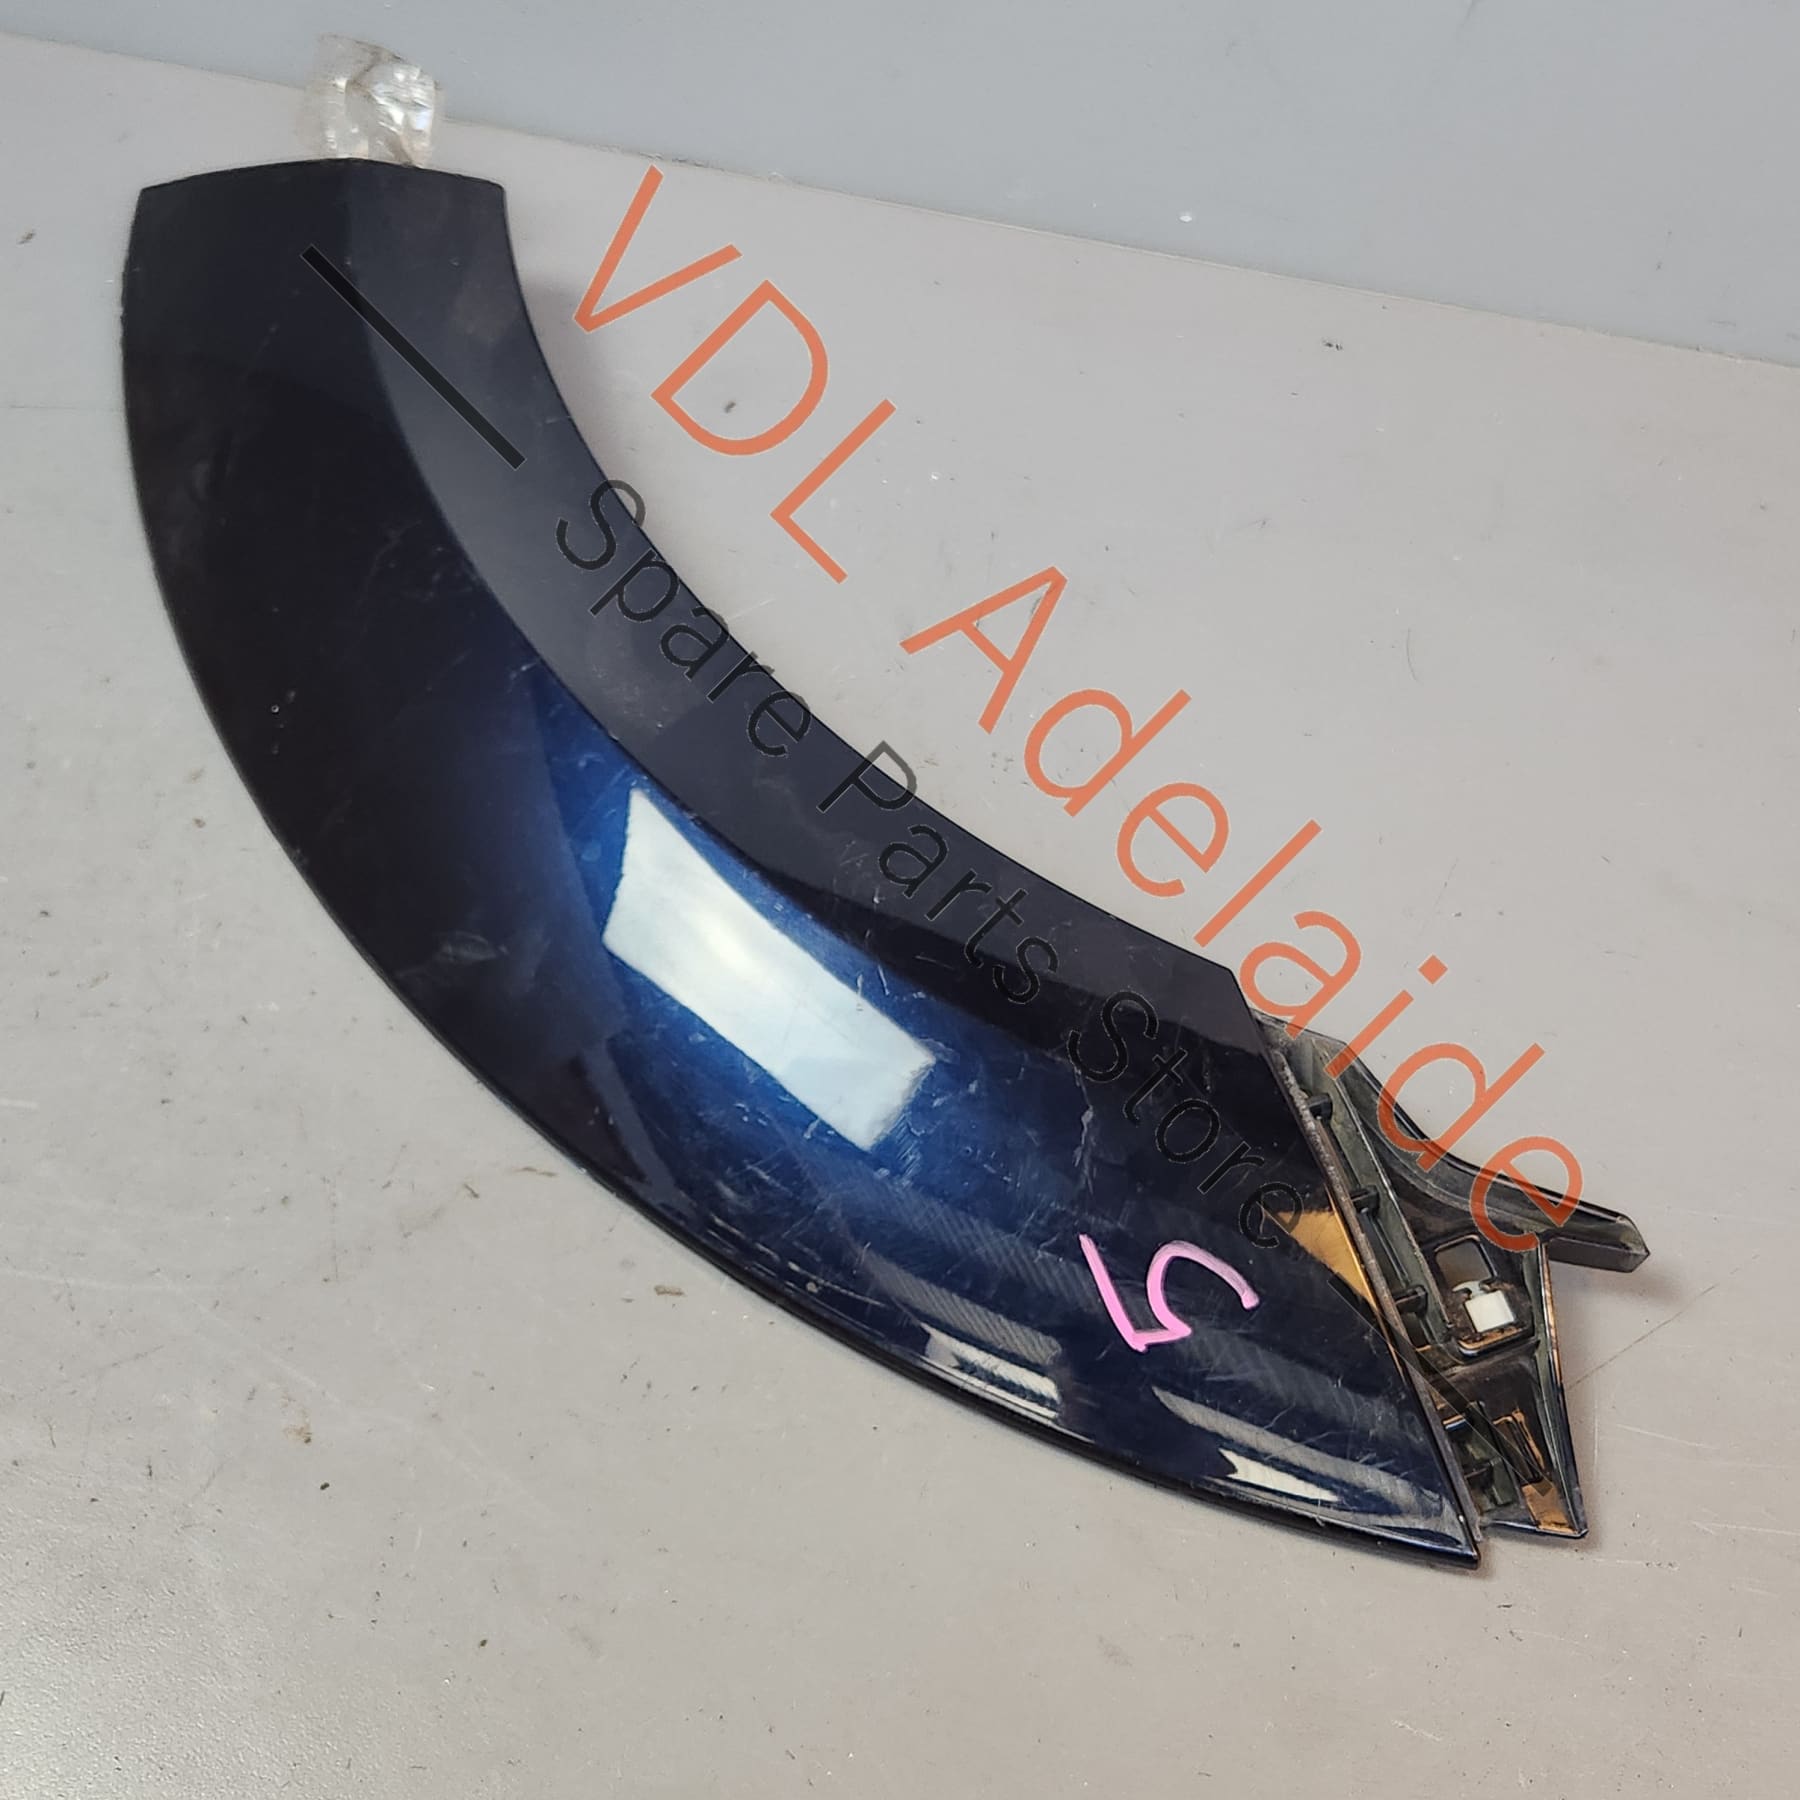 638121451R638120001R Renault Megane MK3 III RS250 RS265 RS275 Front Right Fender Flare Wheel Arch Trim Bodykit 638121451R 638120001R Twilight Blue 472